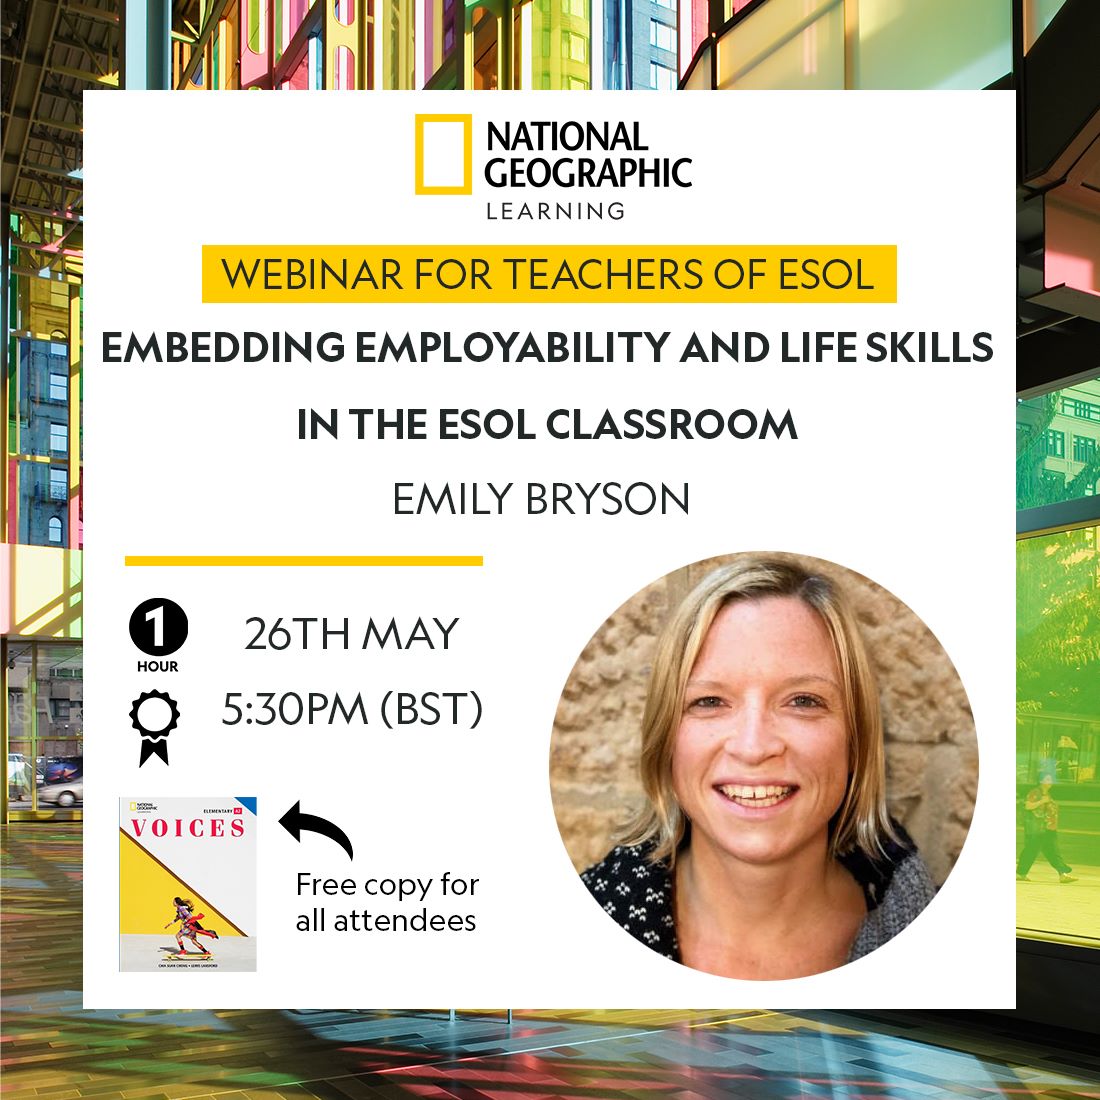 Join me for my first webinar for @ELTNGLEurope on 26th May. I'll be sharing my knowledge on how to embed Employability and Life Skills into the ESOL classroom: lnkd.in/d-Gxik4
#ESOL #ESOLChat #refugees #employability #TESOL #NATECLA #lifeskills @iateflesolsig